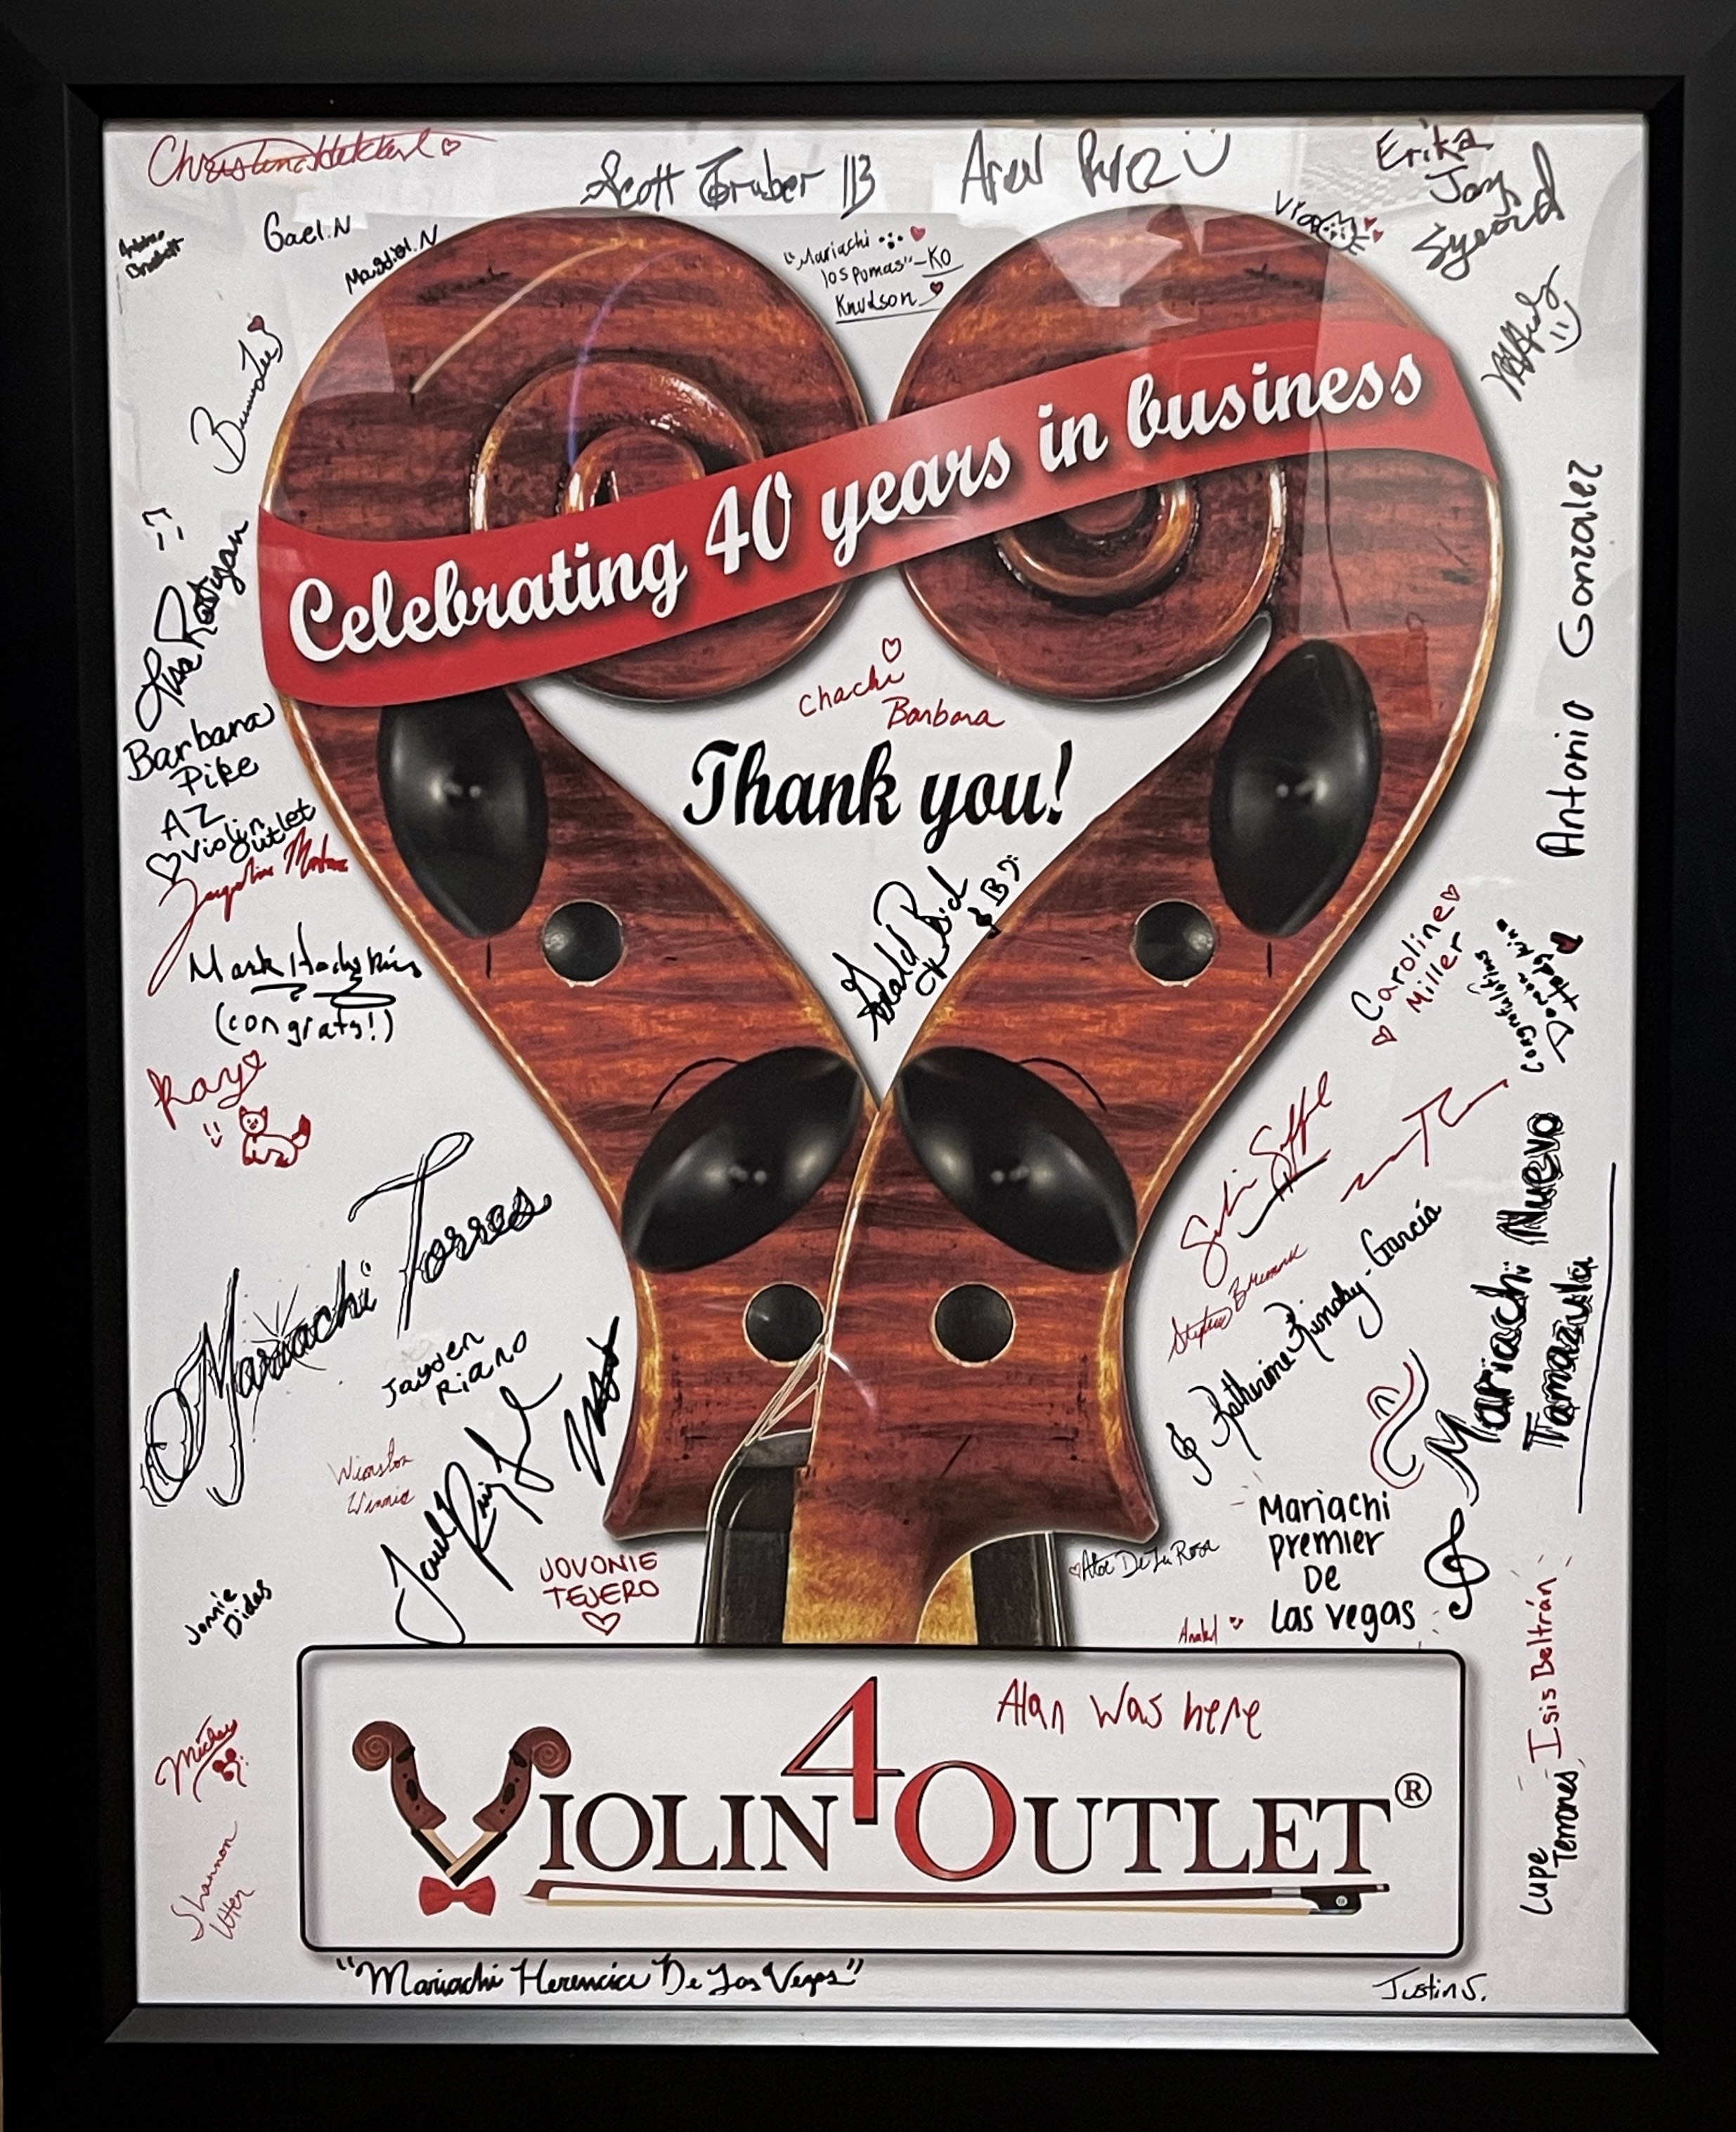 Violin Outlet celebrate 40 years in business